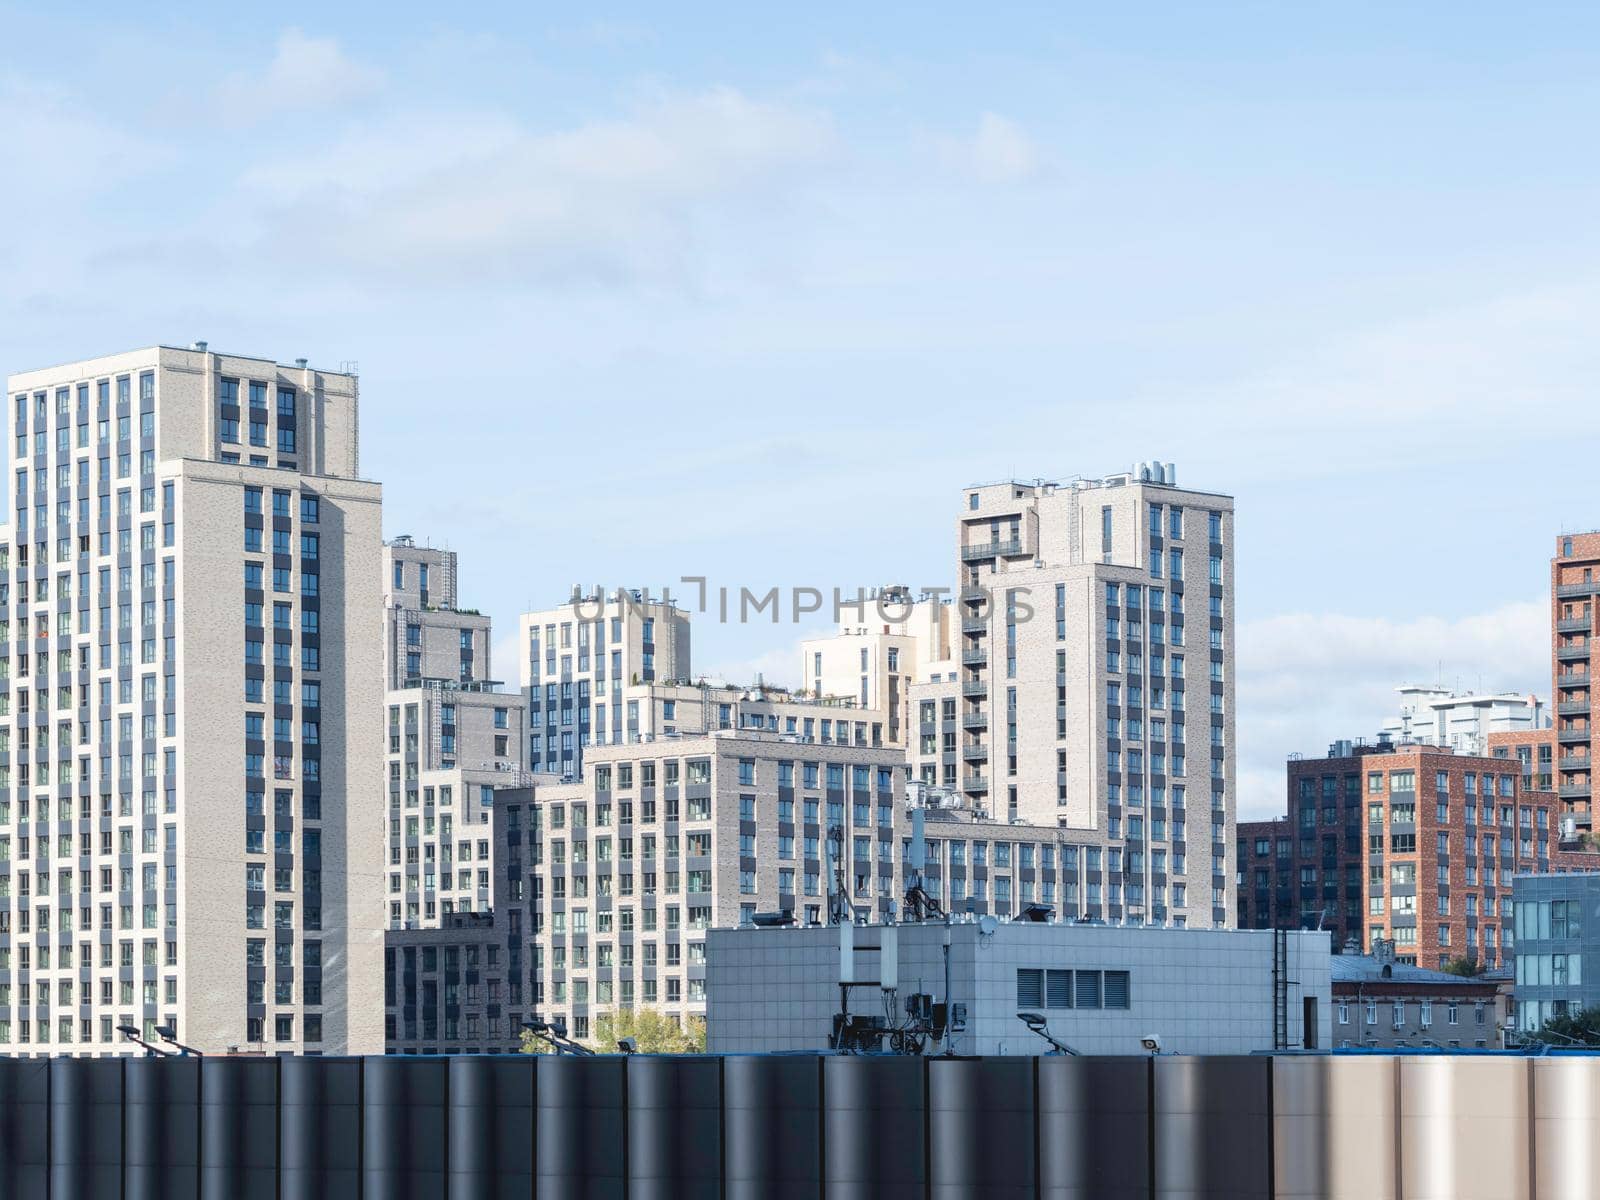 New residential district of Moscow. Modern architecture of apartment buildings. Horizontal banner with clear blue sky. Russia.